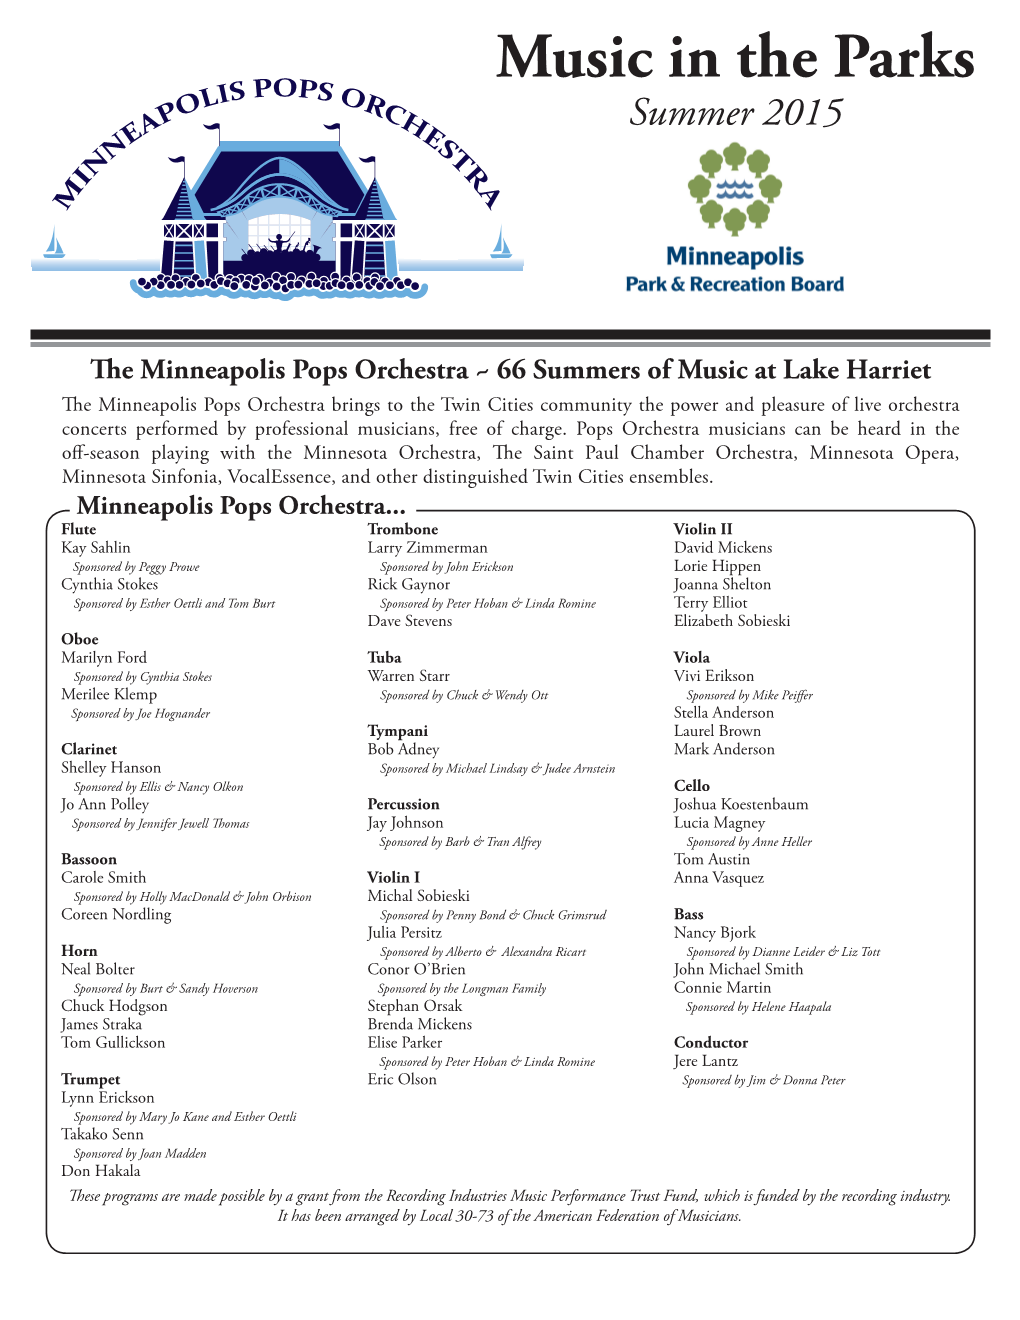 Music in the Parks Summer 2015